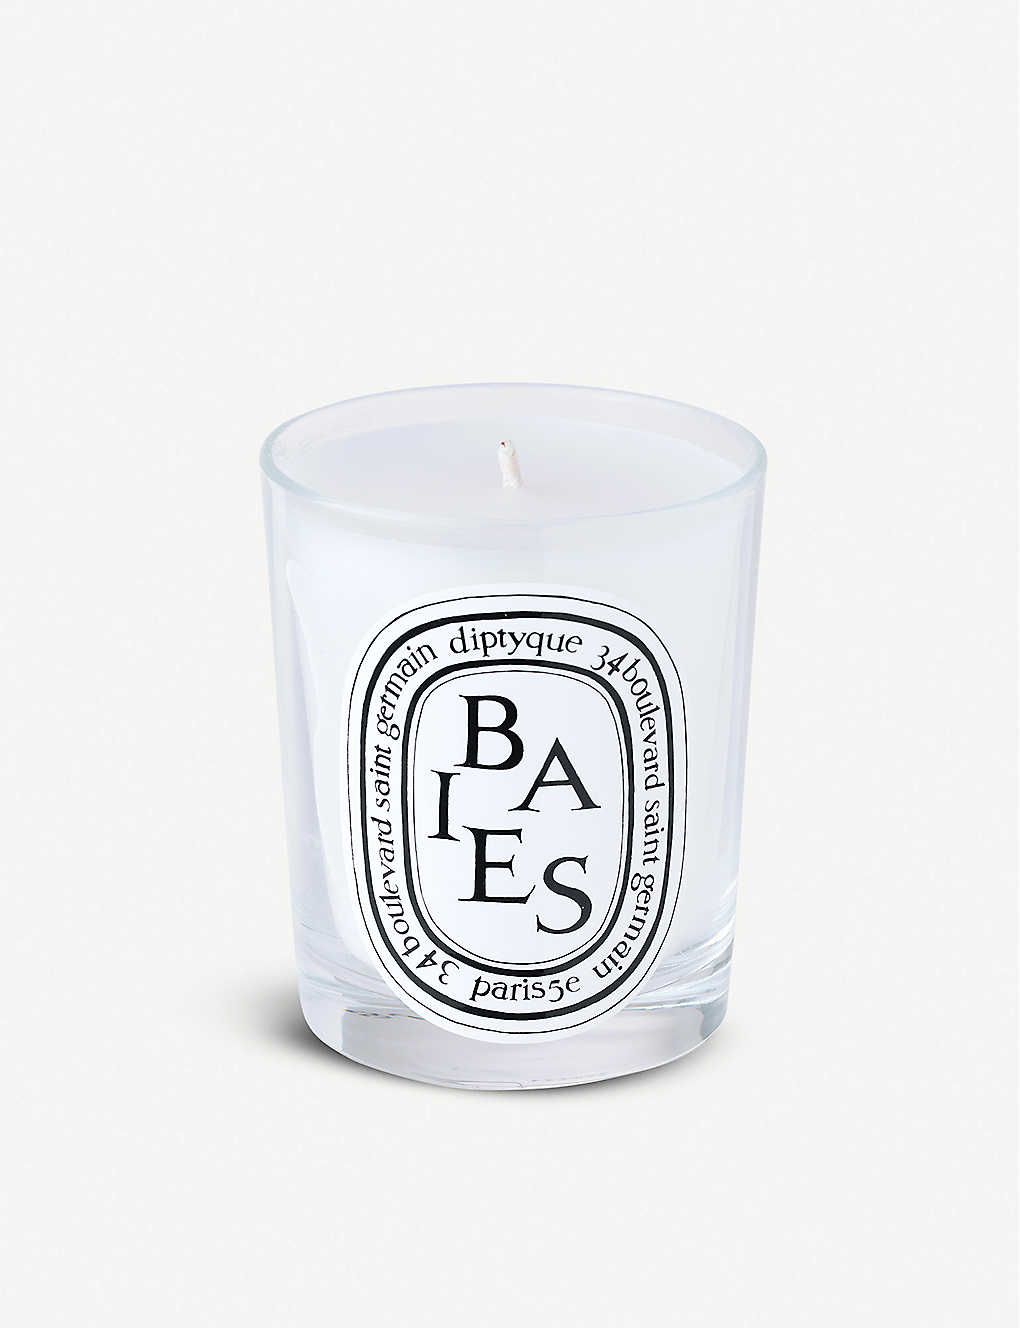 DIPTYQUE
			
			
				Baies scented candle 190g
			
		


		
	
		
		
			
							
								
									... | Selfridges